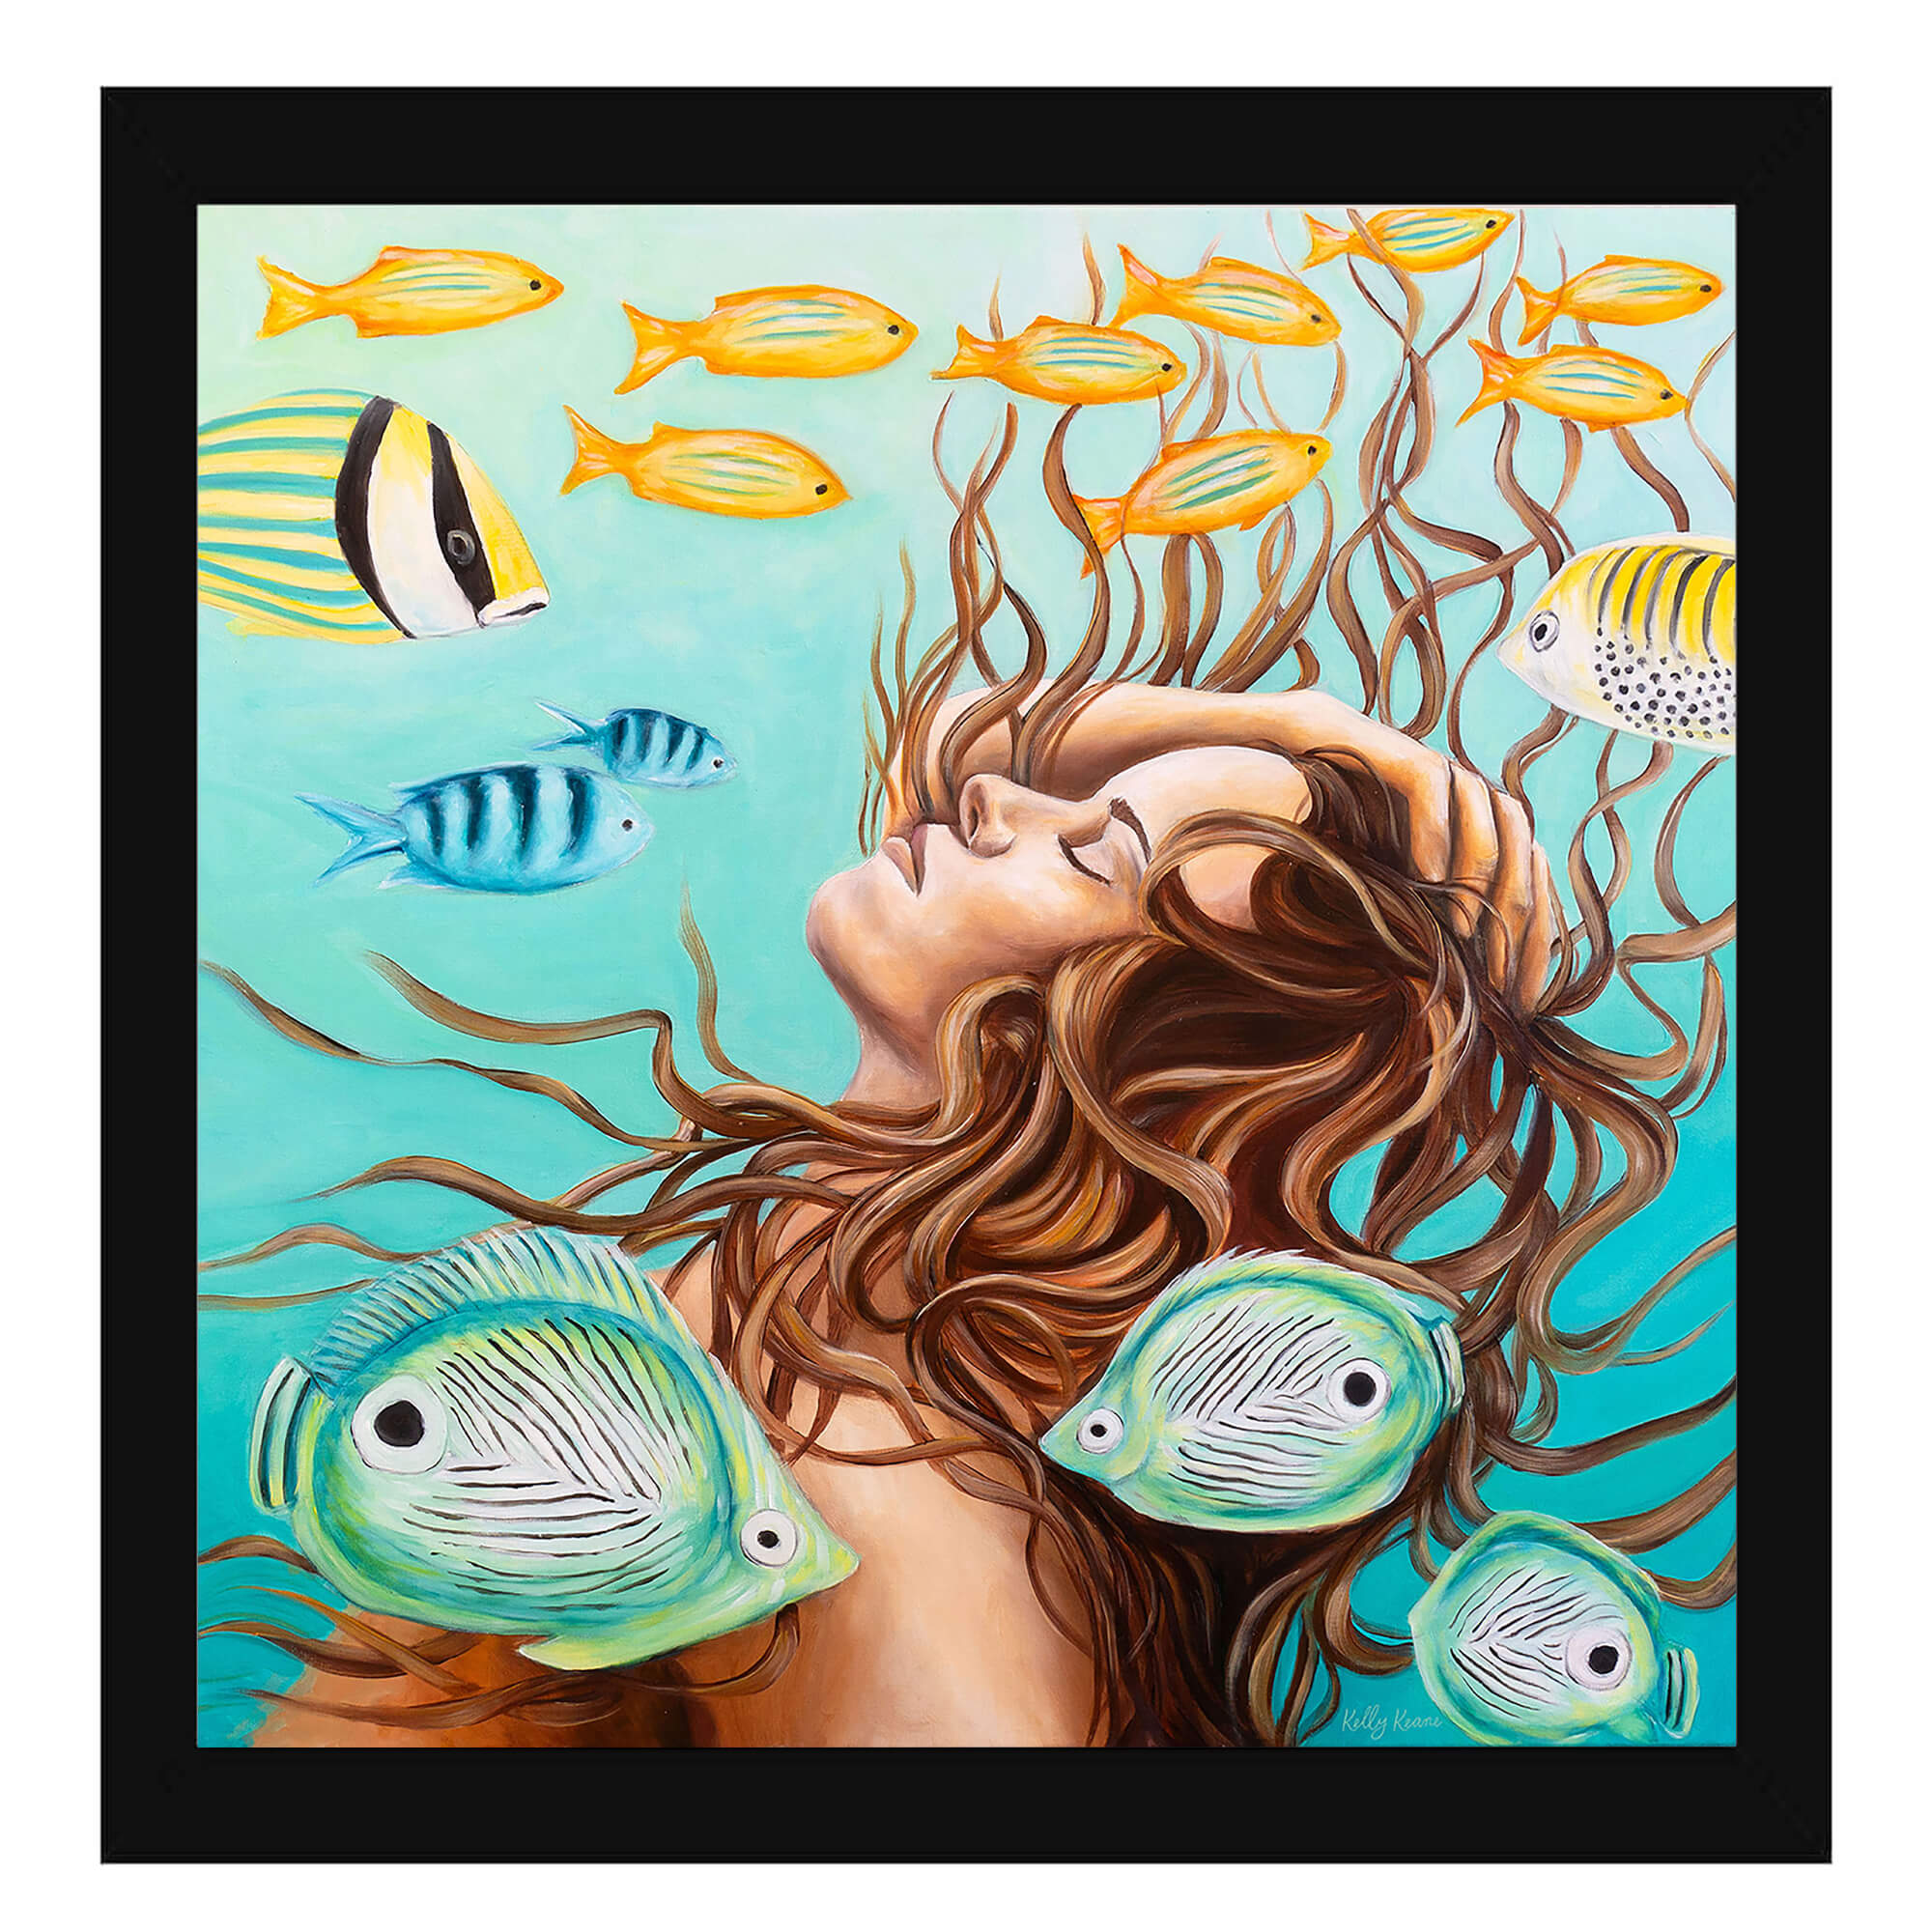 Paper art print featuring a woman with closed eyes under clear teal waters by Hawaii artist Kelly Keane